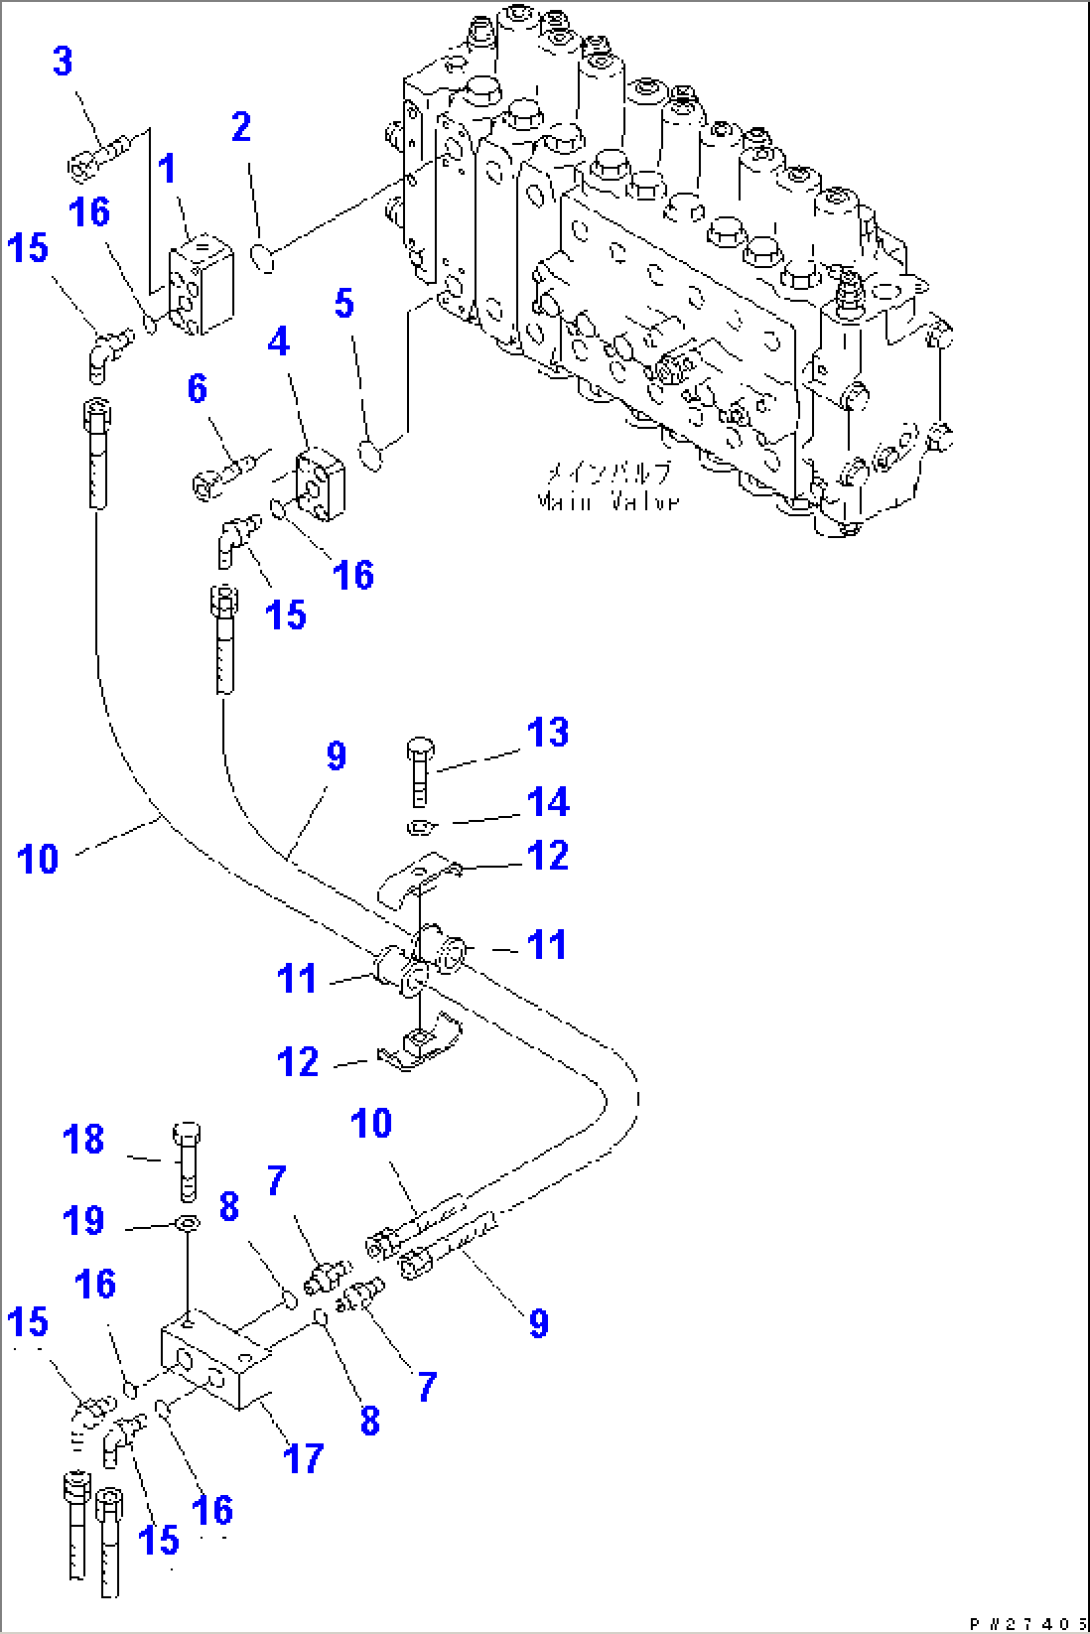 OPTION LINES (CRANE PIPING)